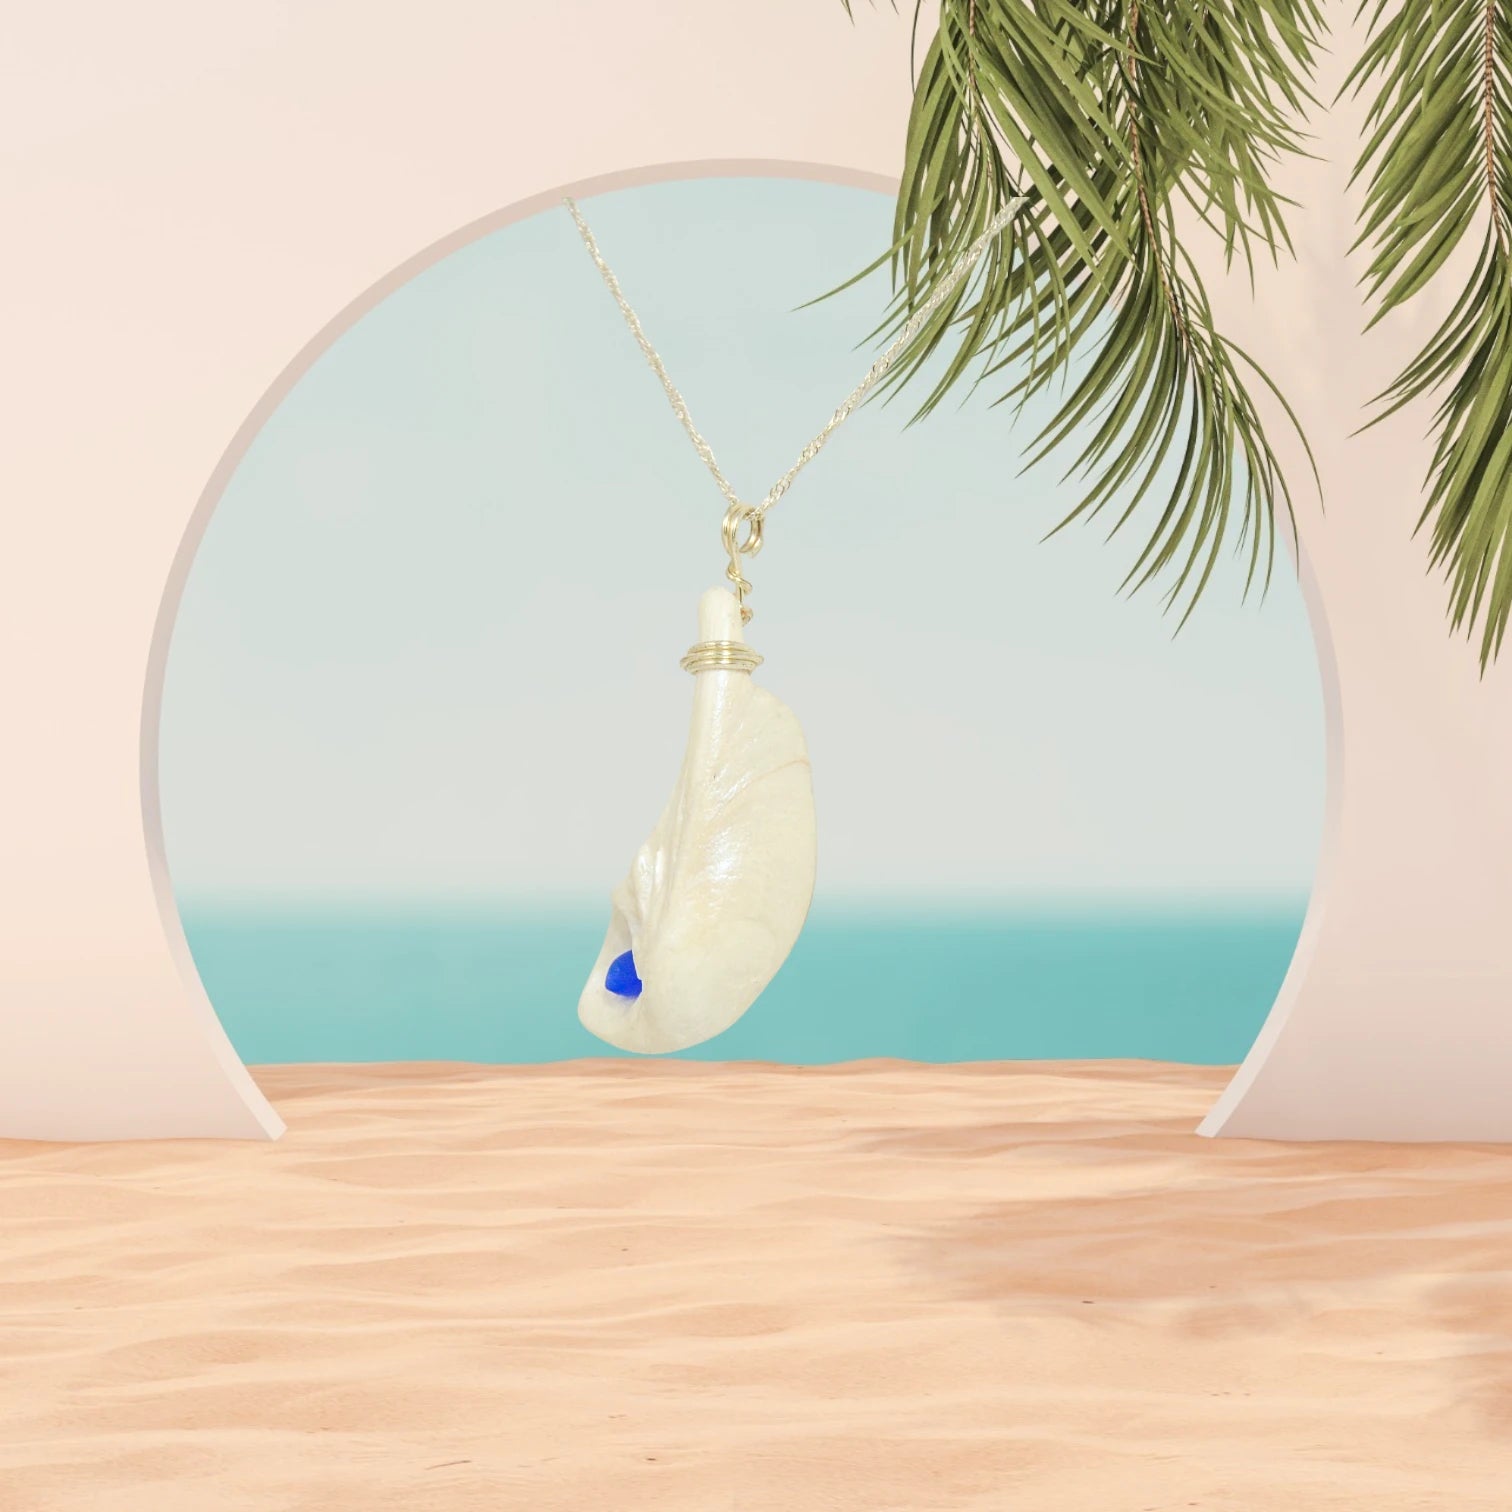 The cobalt blue sea glass pendant is shown hanging from a chain with a ocean background.  The pendant is turned to show the left side of the pendant.